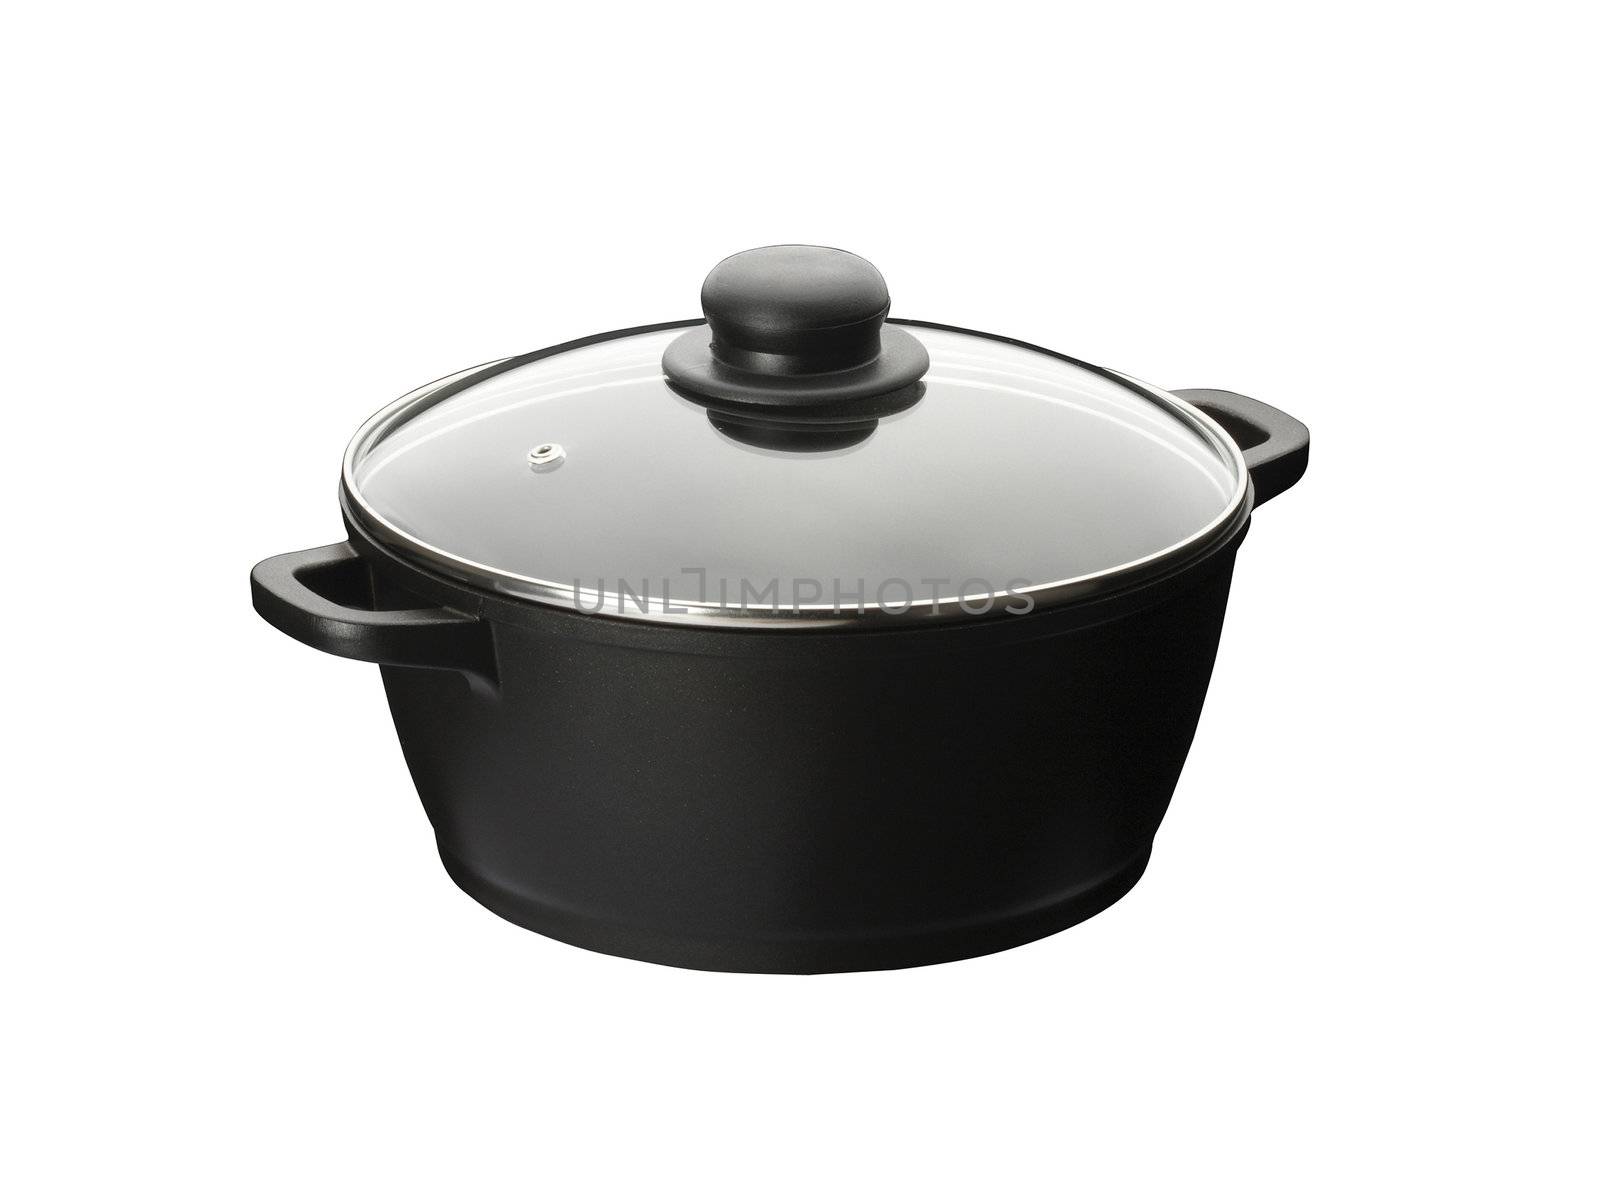 nonstick pan with lid, isolated on white background 